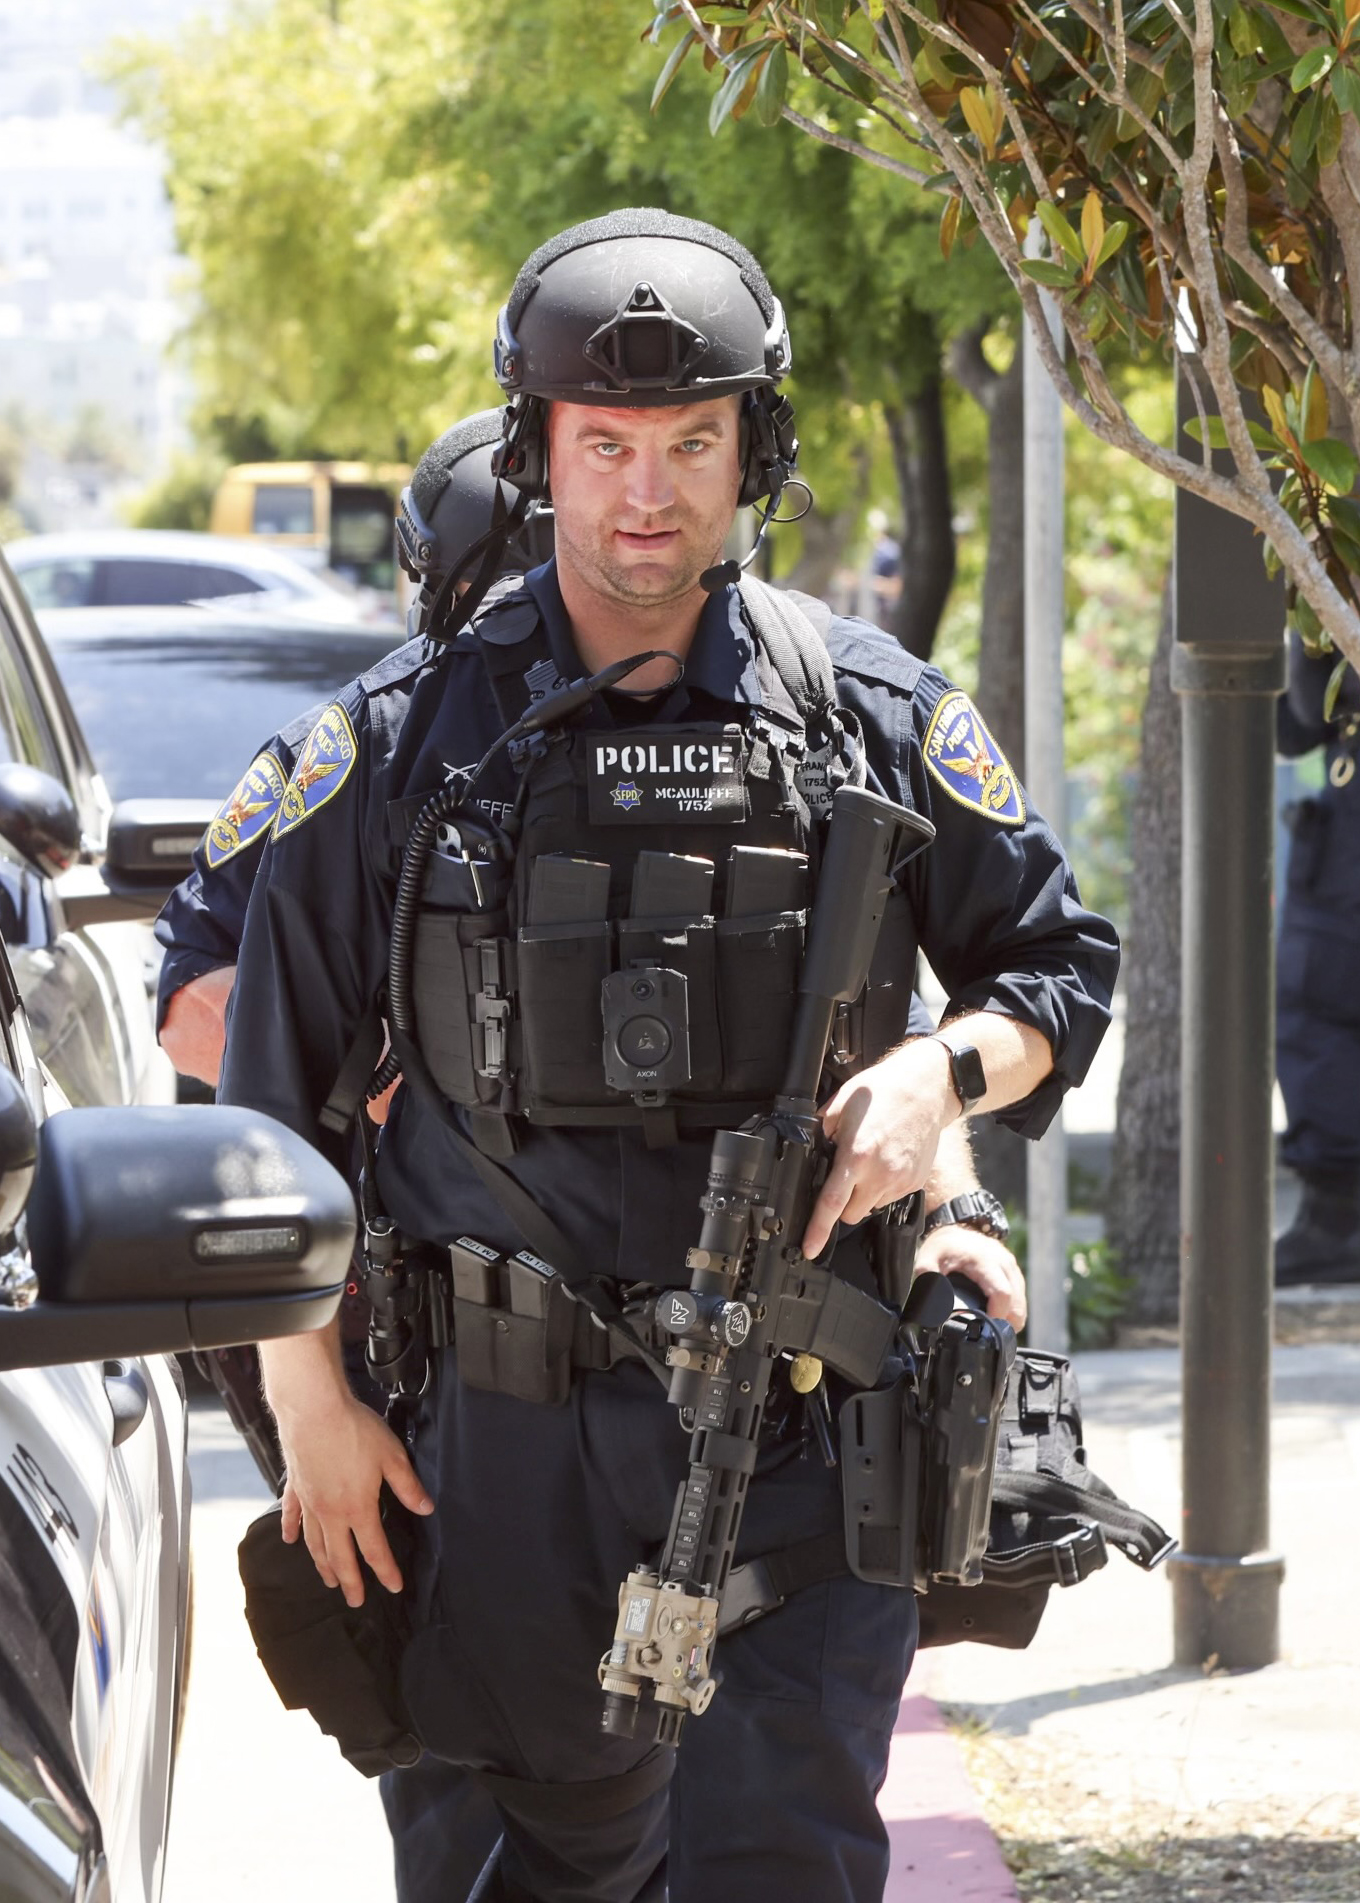 The image shows a police officer in tactical gear, including a helmet, body armor, and a rifle, standing near a police vehicle on a sunny day. Trees are visible in the background.